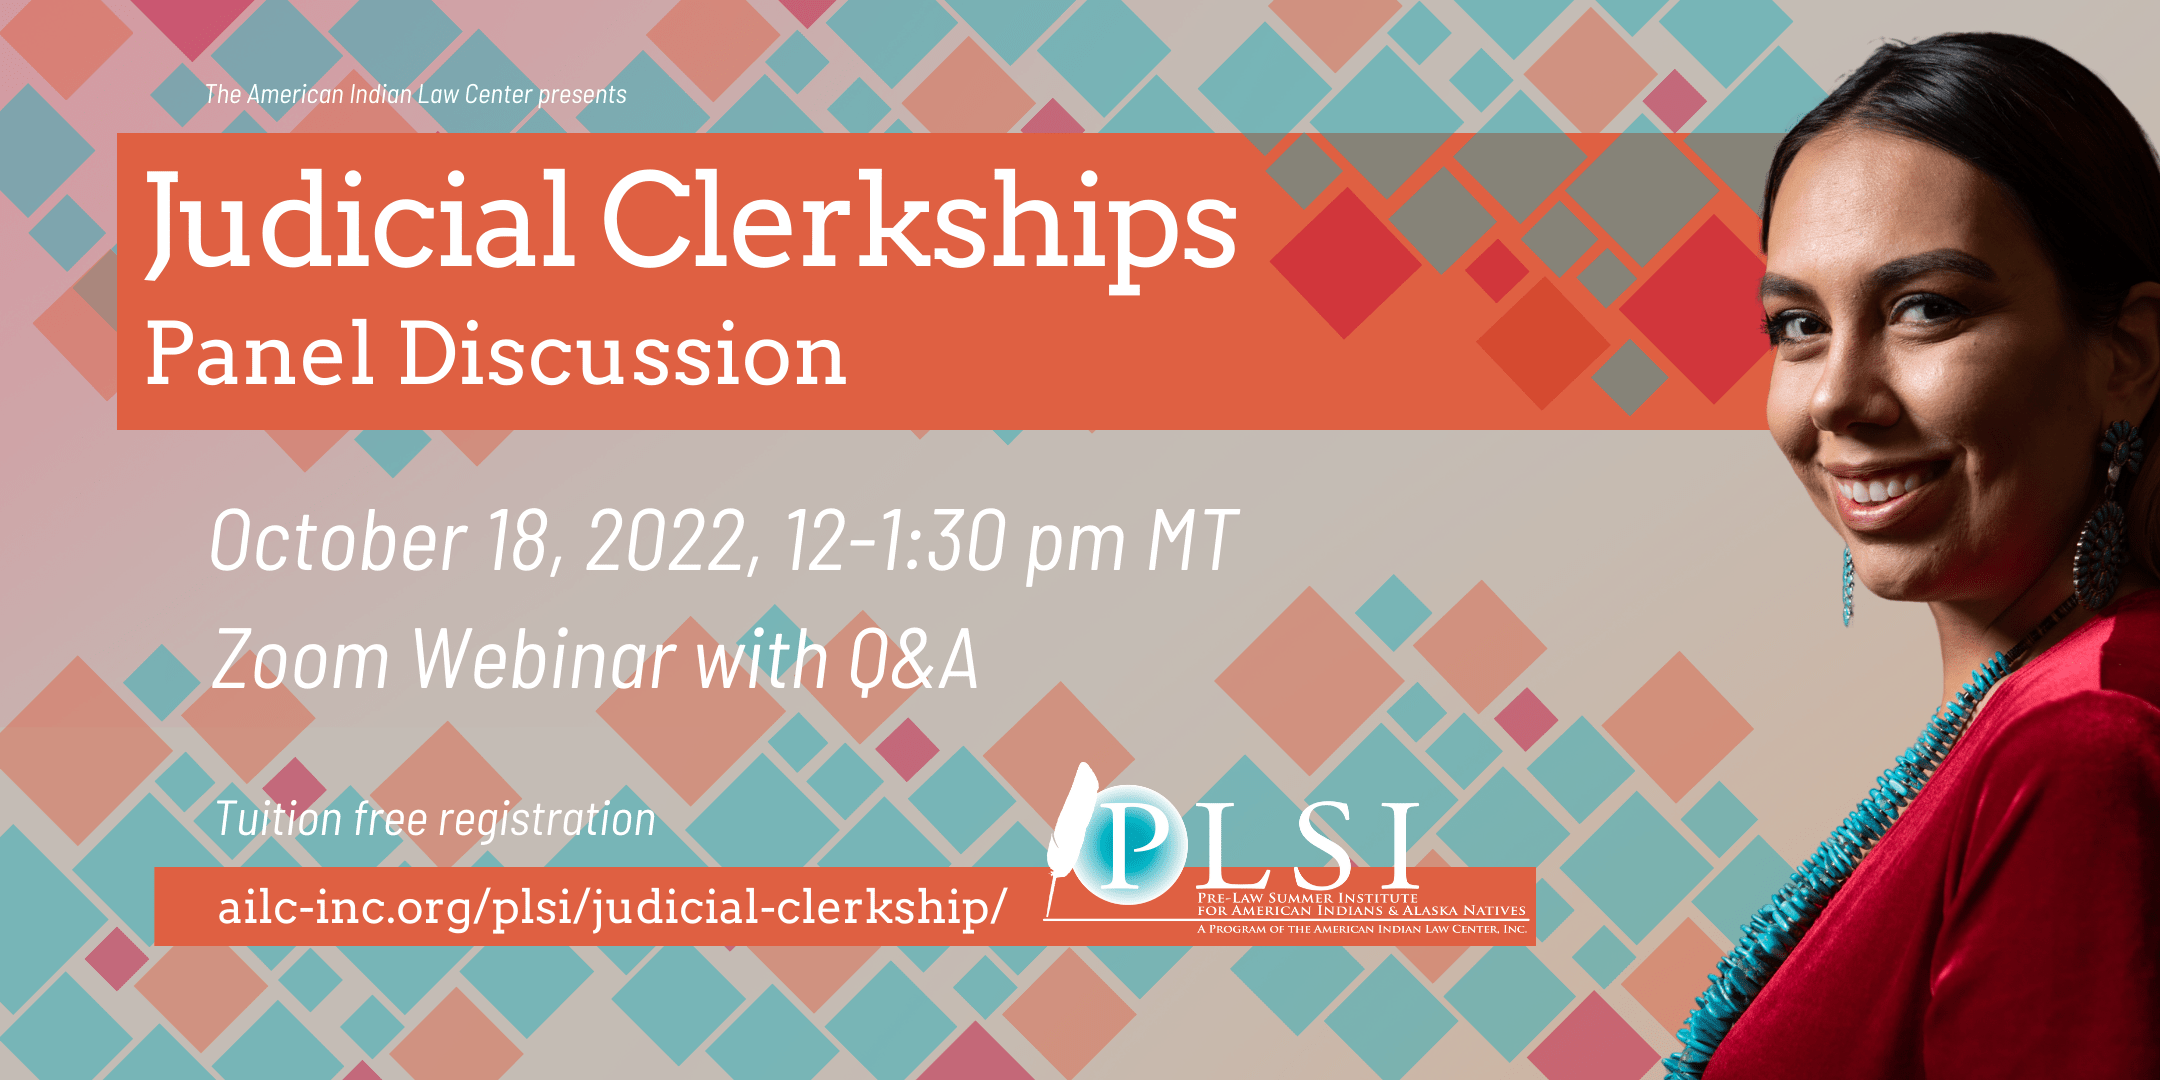 Judicial Clerkship Panel Discussion announcement with date and time.